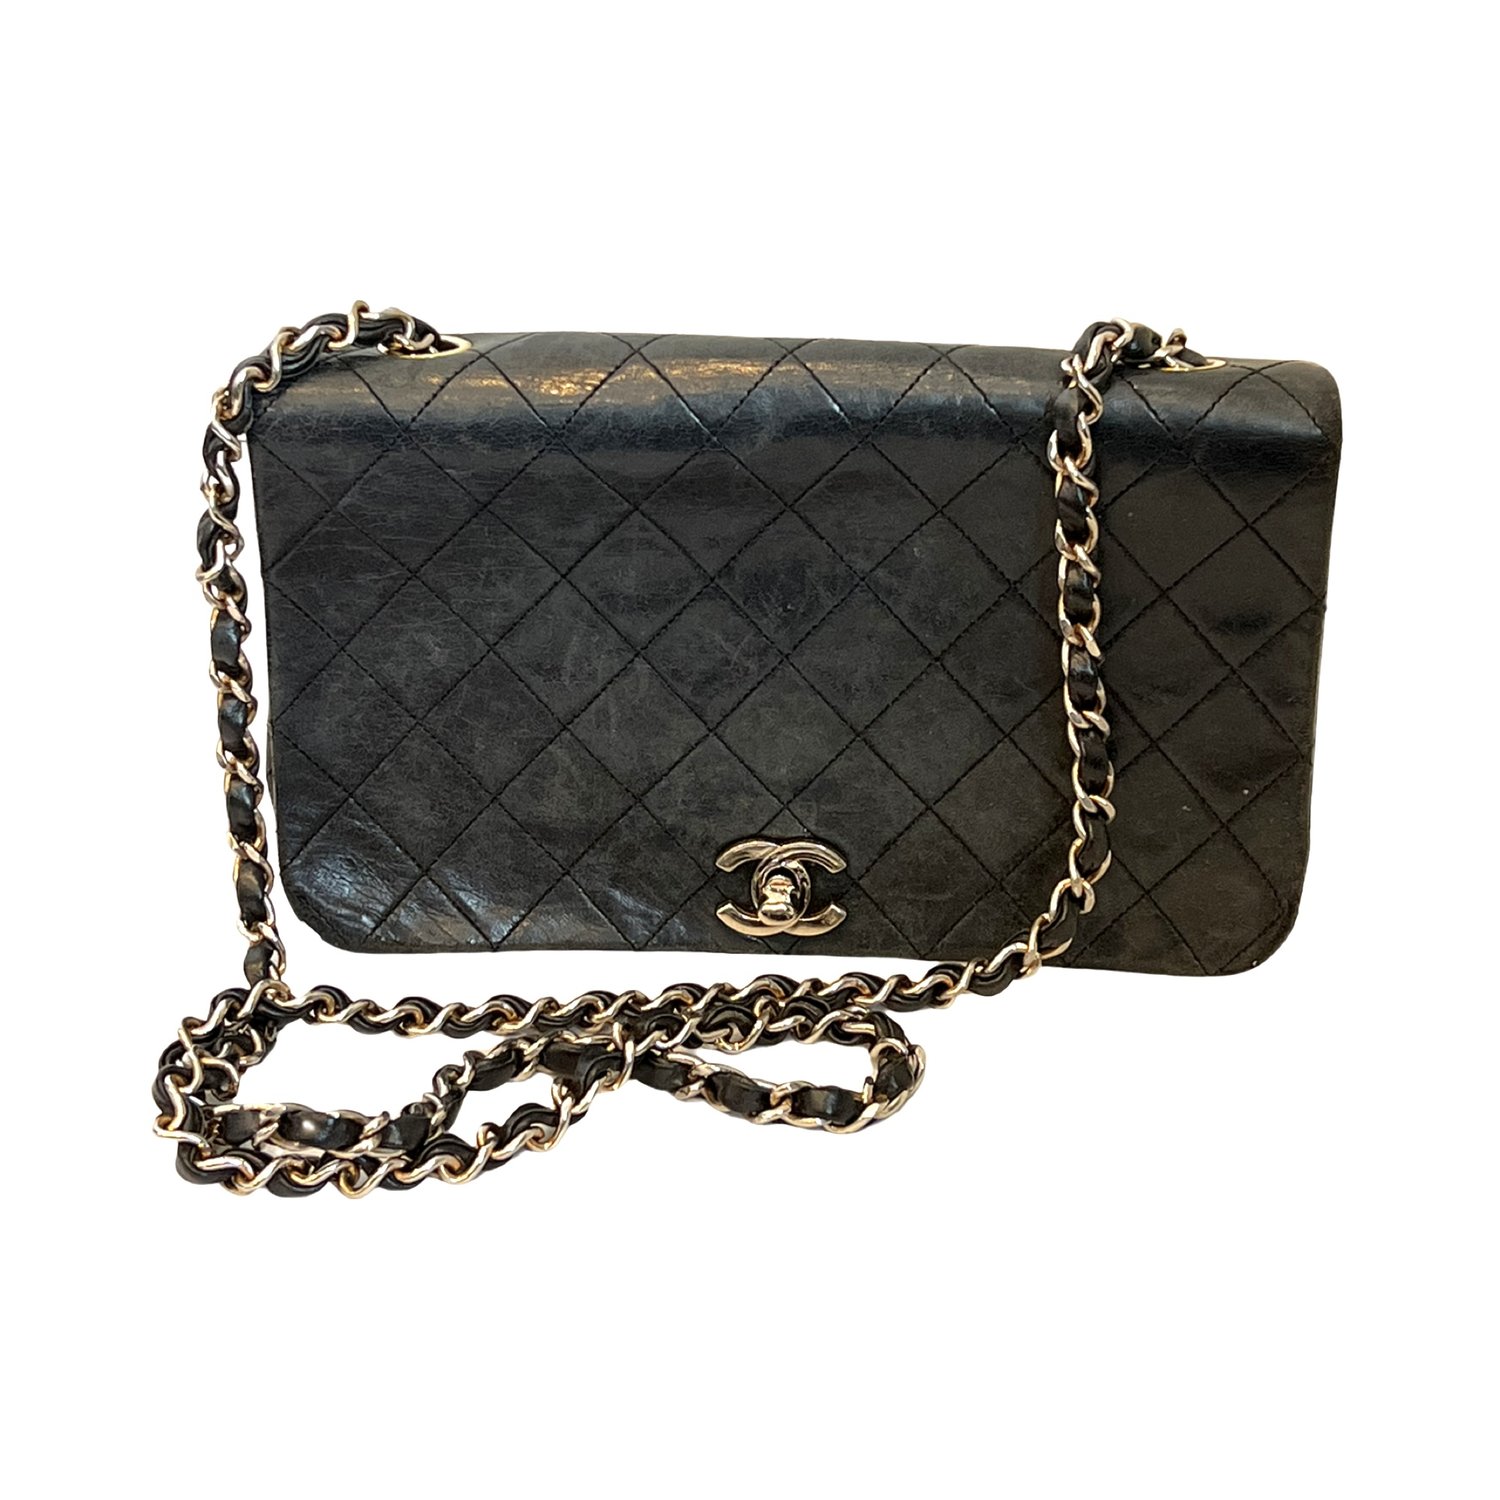 Vintage Chanel Bags – Tagged Blue